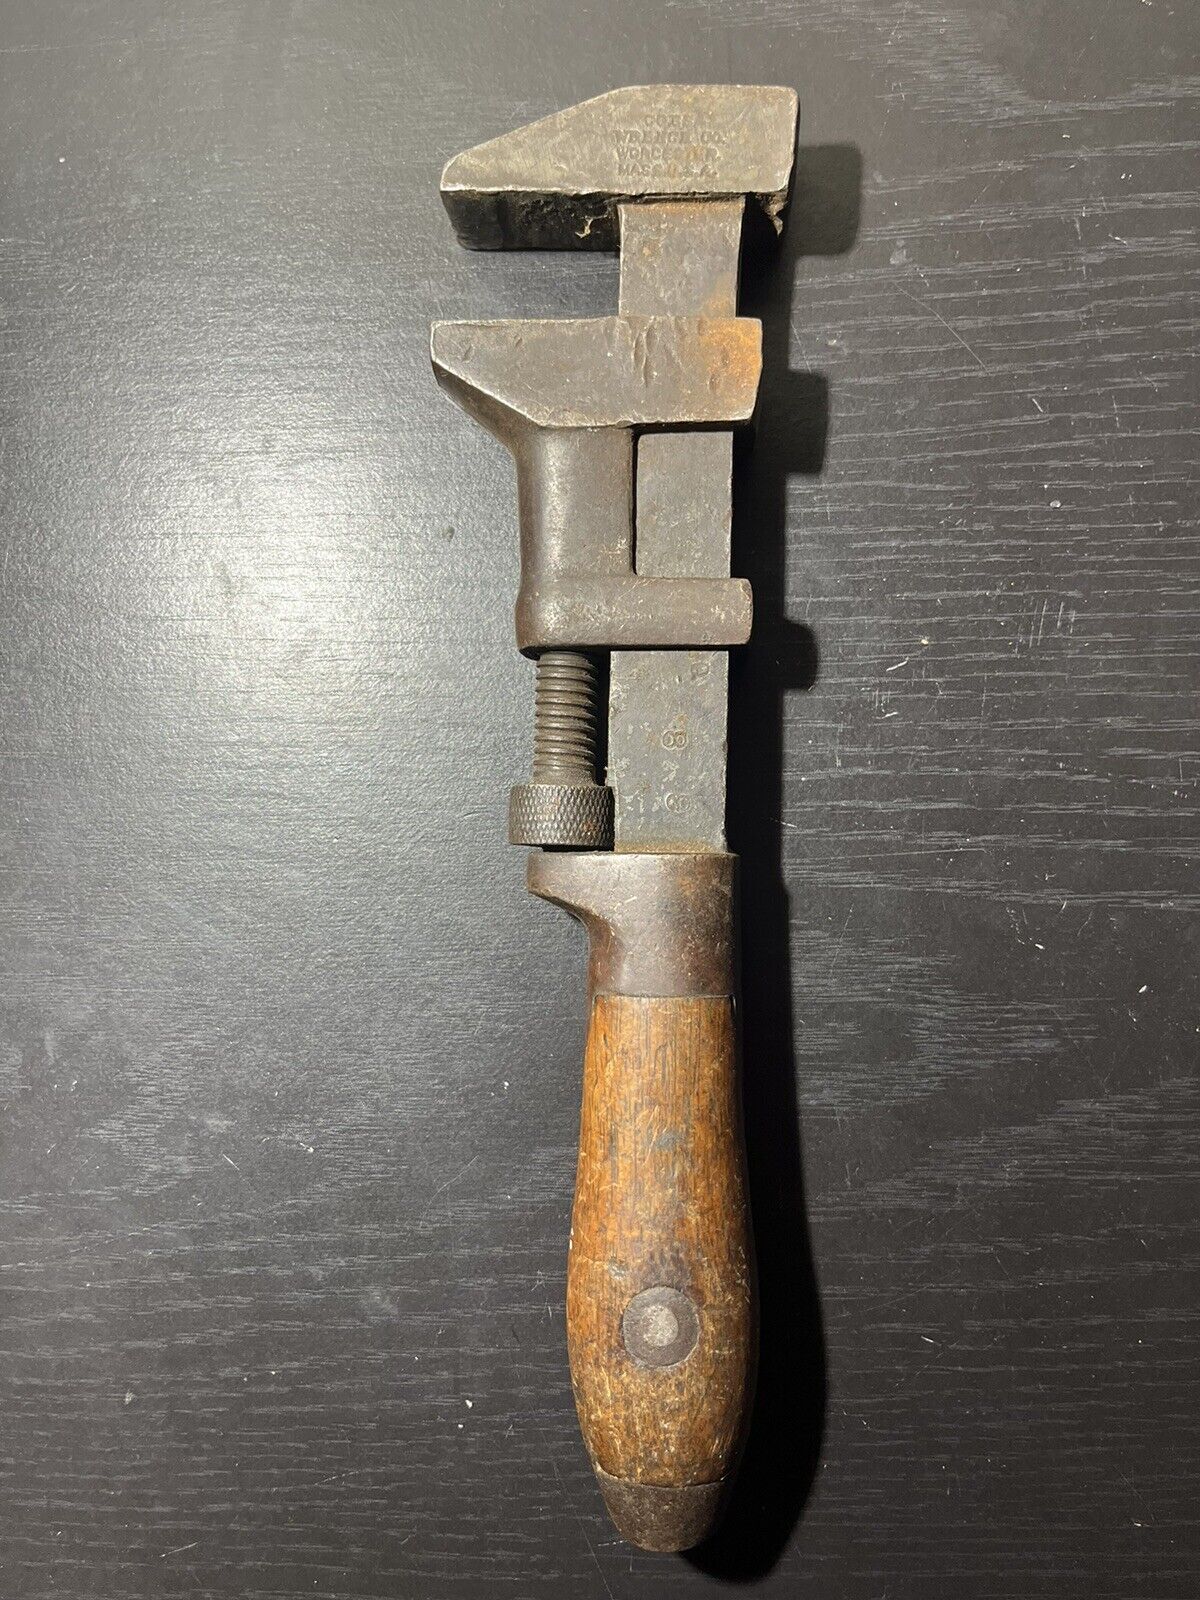 VINTAGE Coes Wrench Co Adjustable Wrench Wooden Handle GREAT